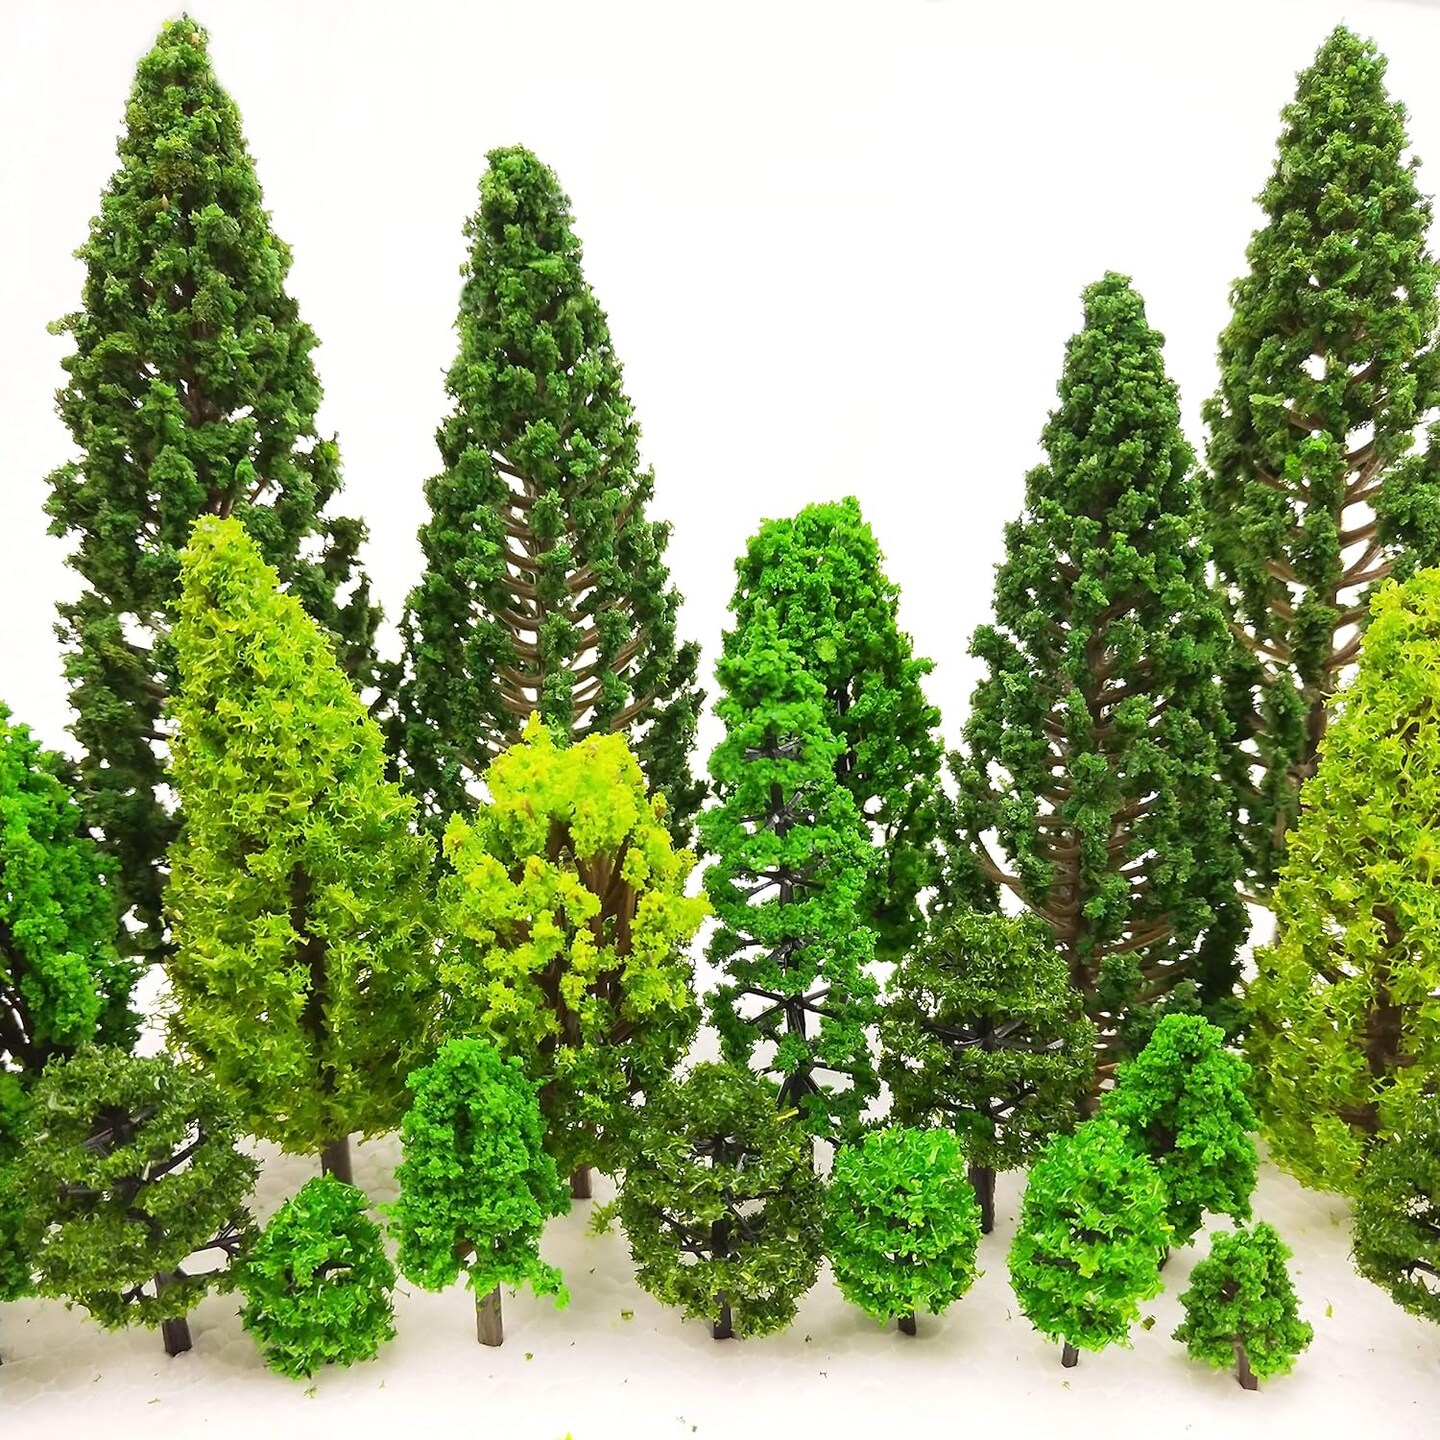 36 Pieces Model Trees 1.36-6 inch Mixed Model Tree Train Scenery Architecture Trees Fake Trees for DIY Crafts, Building Model, Scenery Landscape Natural Green